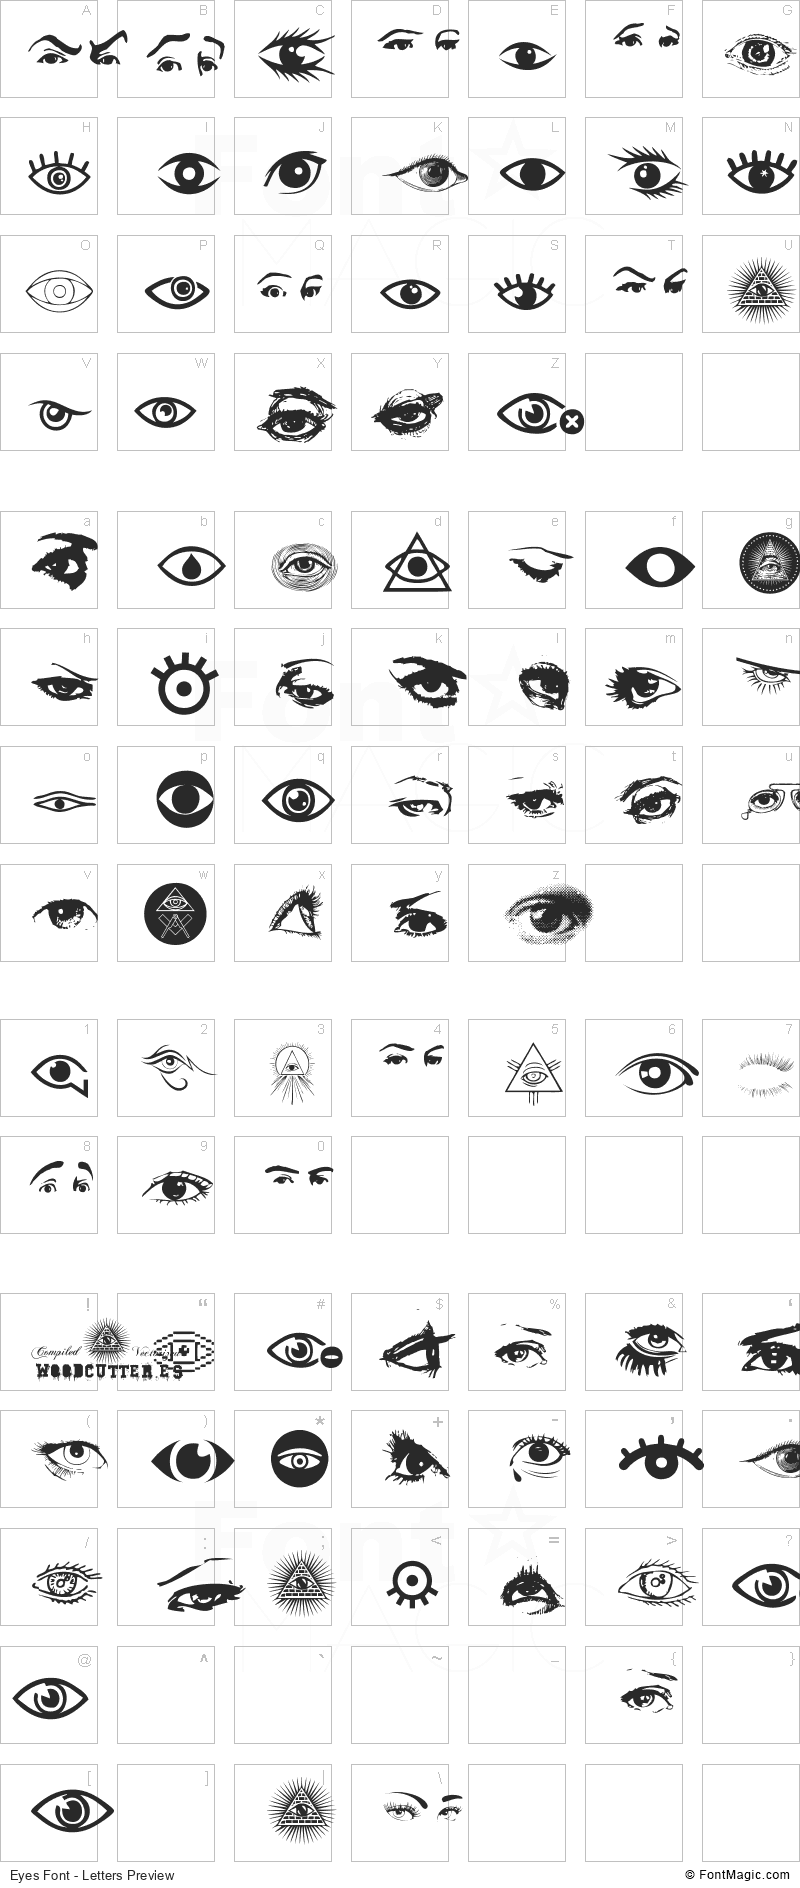 Eyes Font - All Latters Preview Chart